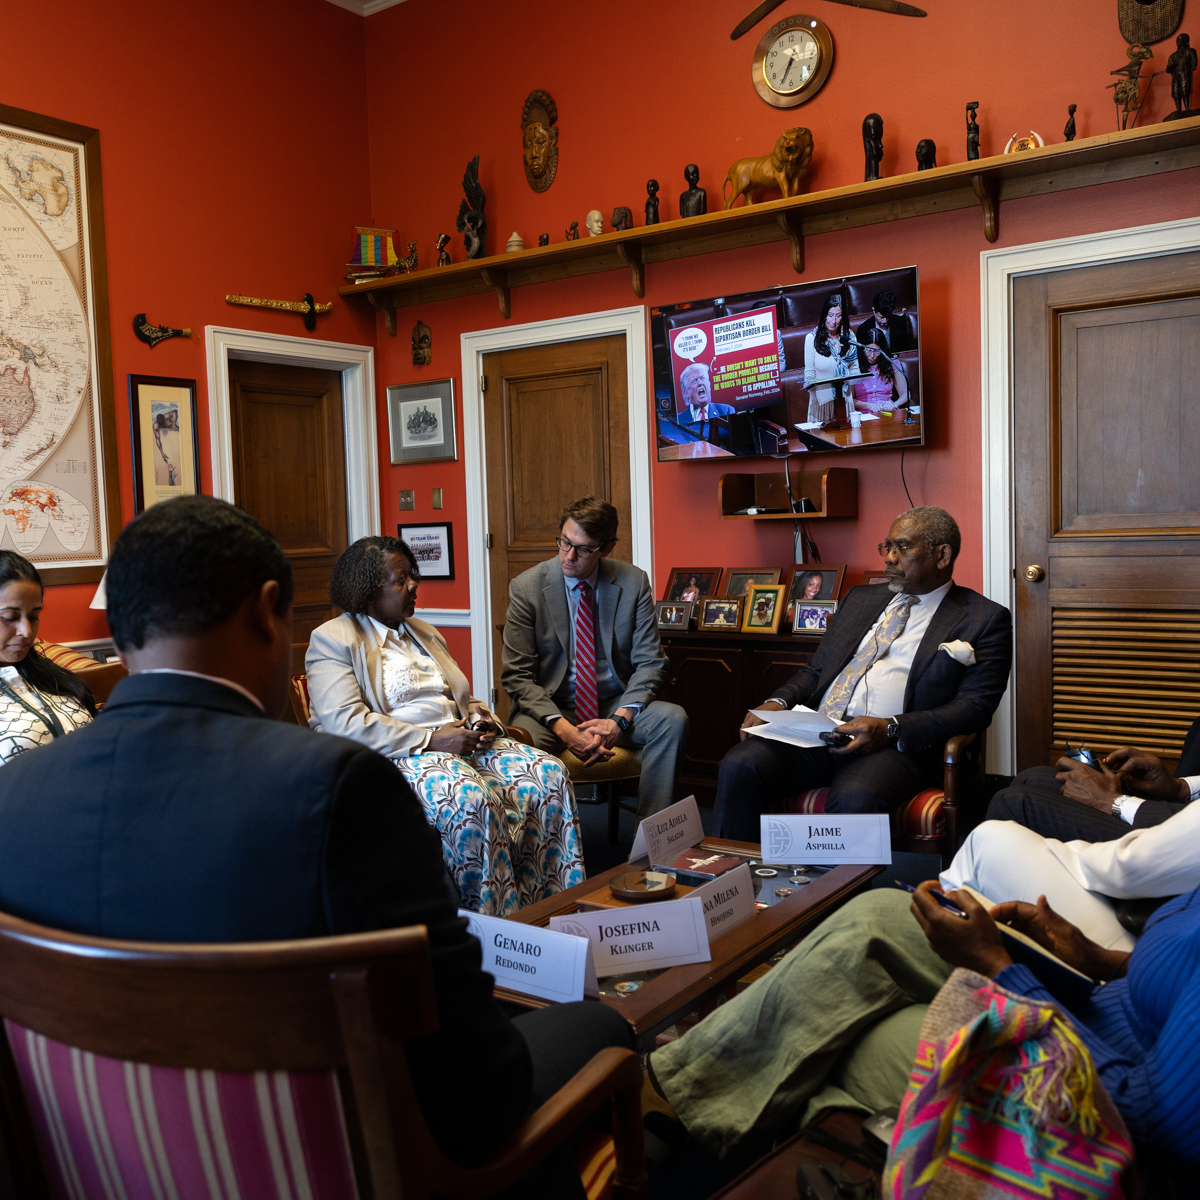 RM @RepGregoryMeeks: Great to meet with @AtlanticCouncil’s AMUNAFRO delegation of Colombian mayors and civil society today to discuss the crucial peace accord and ethnic chapter in Colombia, which are essential for Colombia's lasting peace and security.